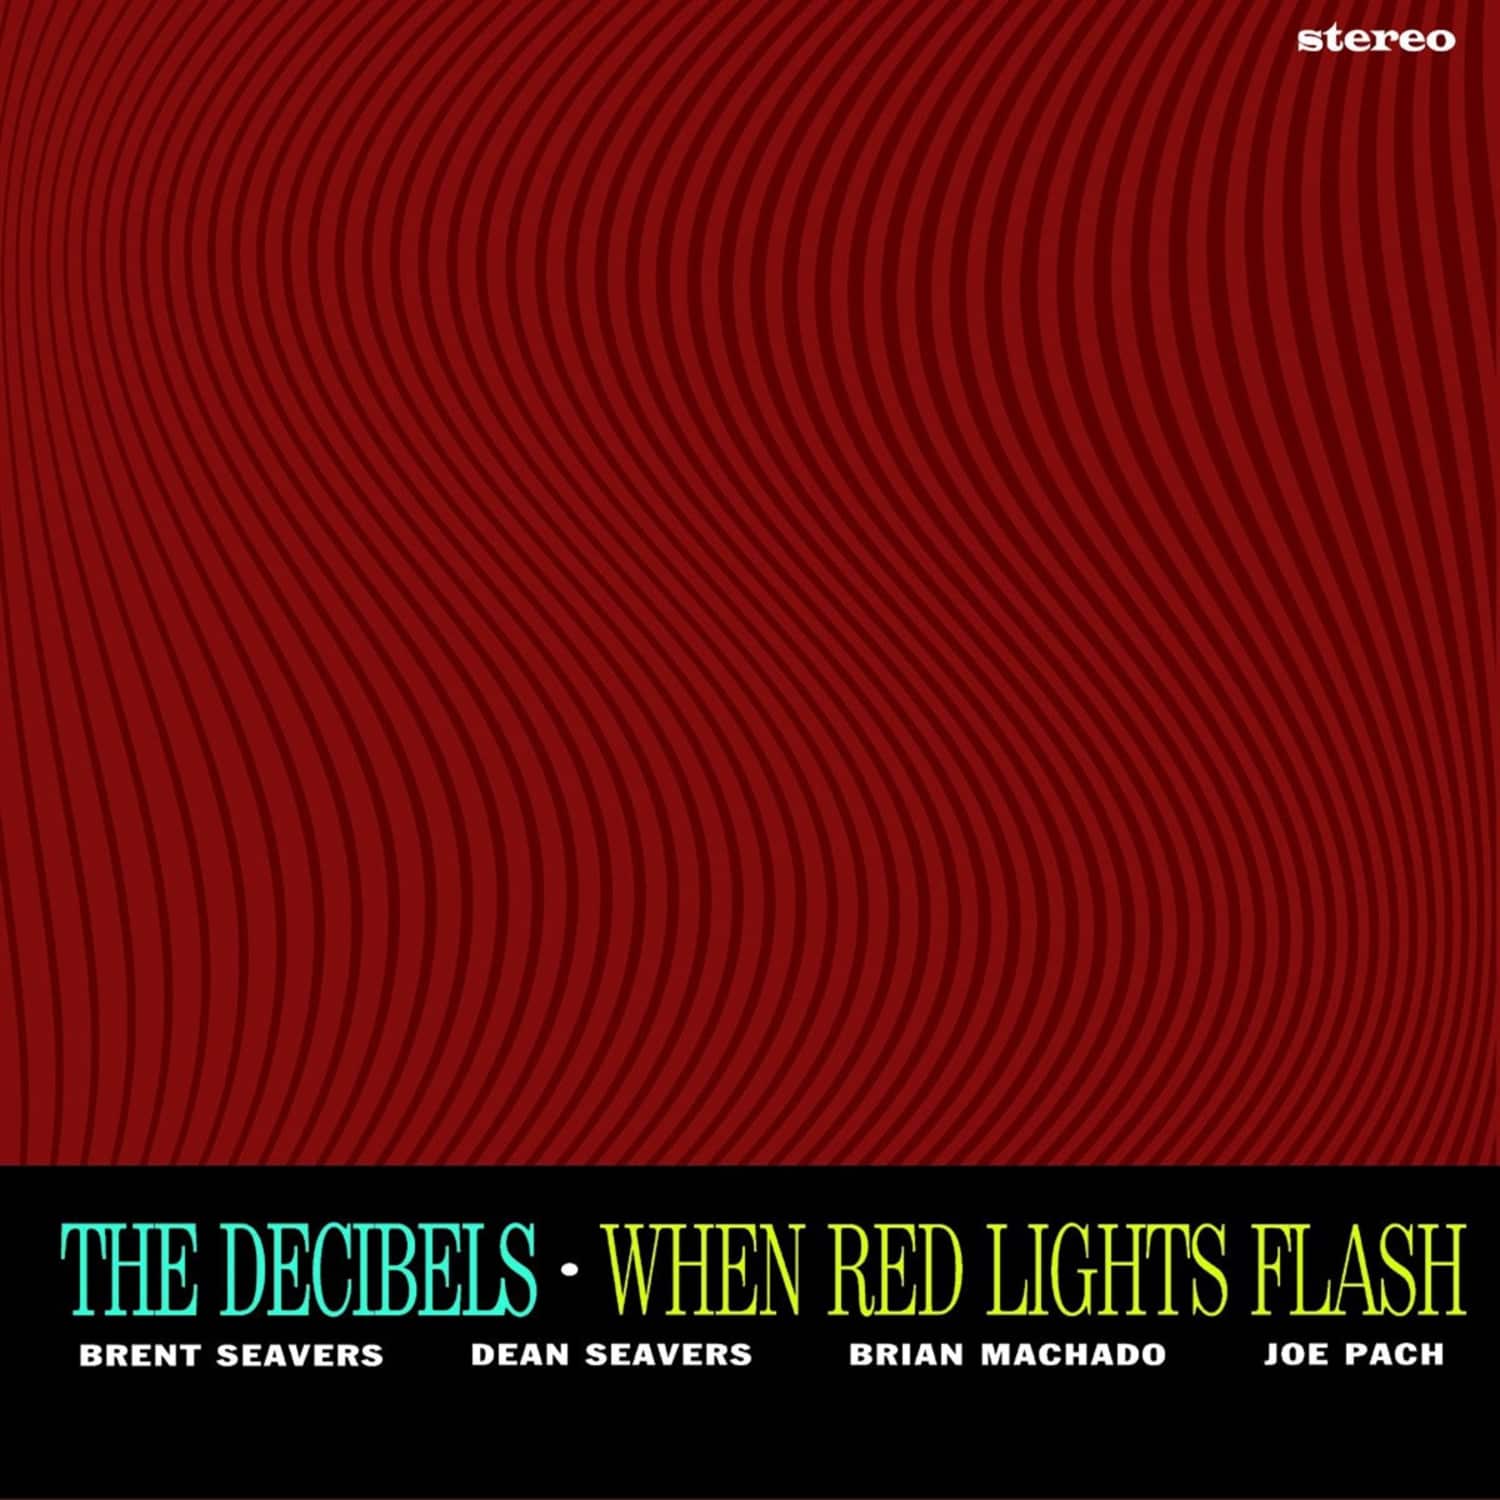 The Decibels - WHEN RED LIGTS FLASH 